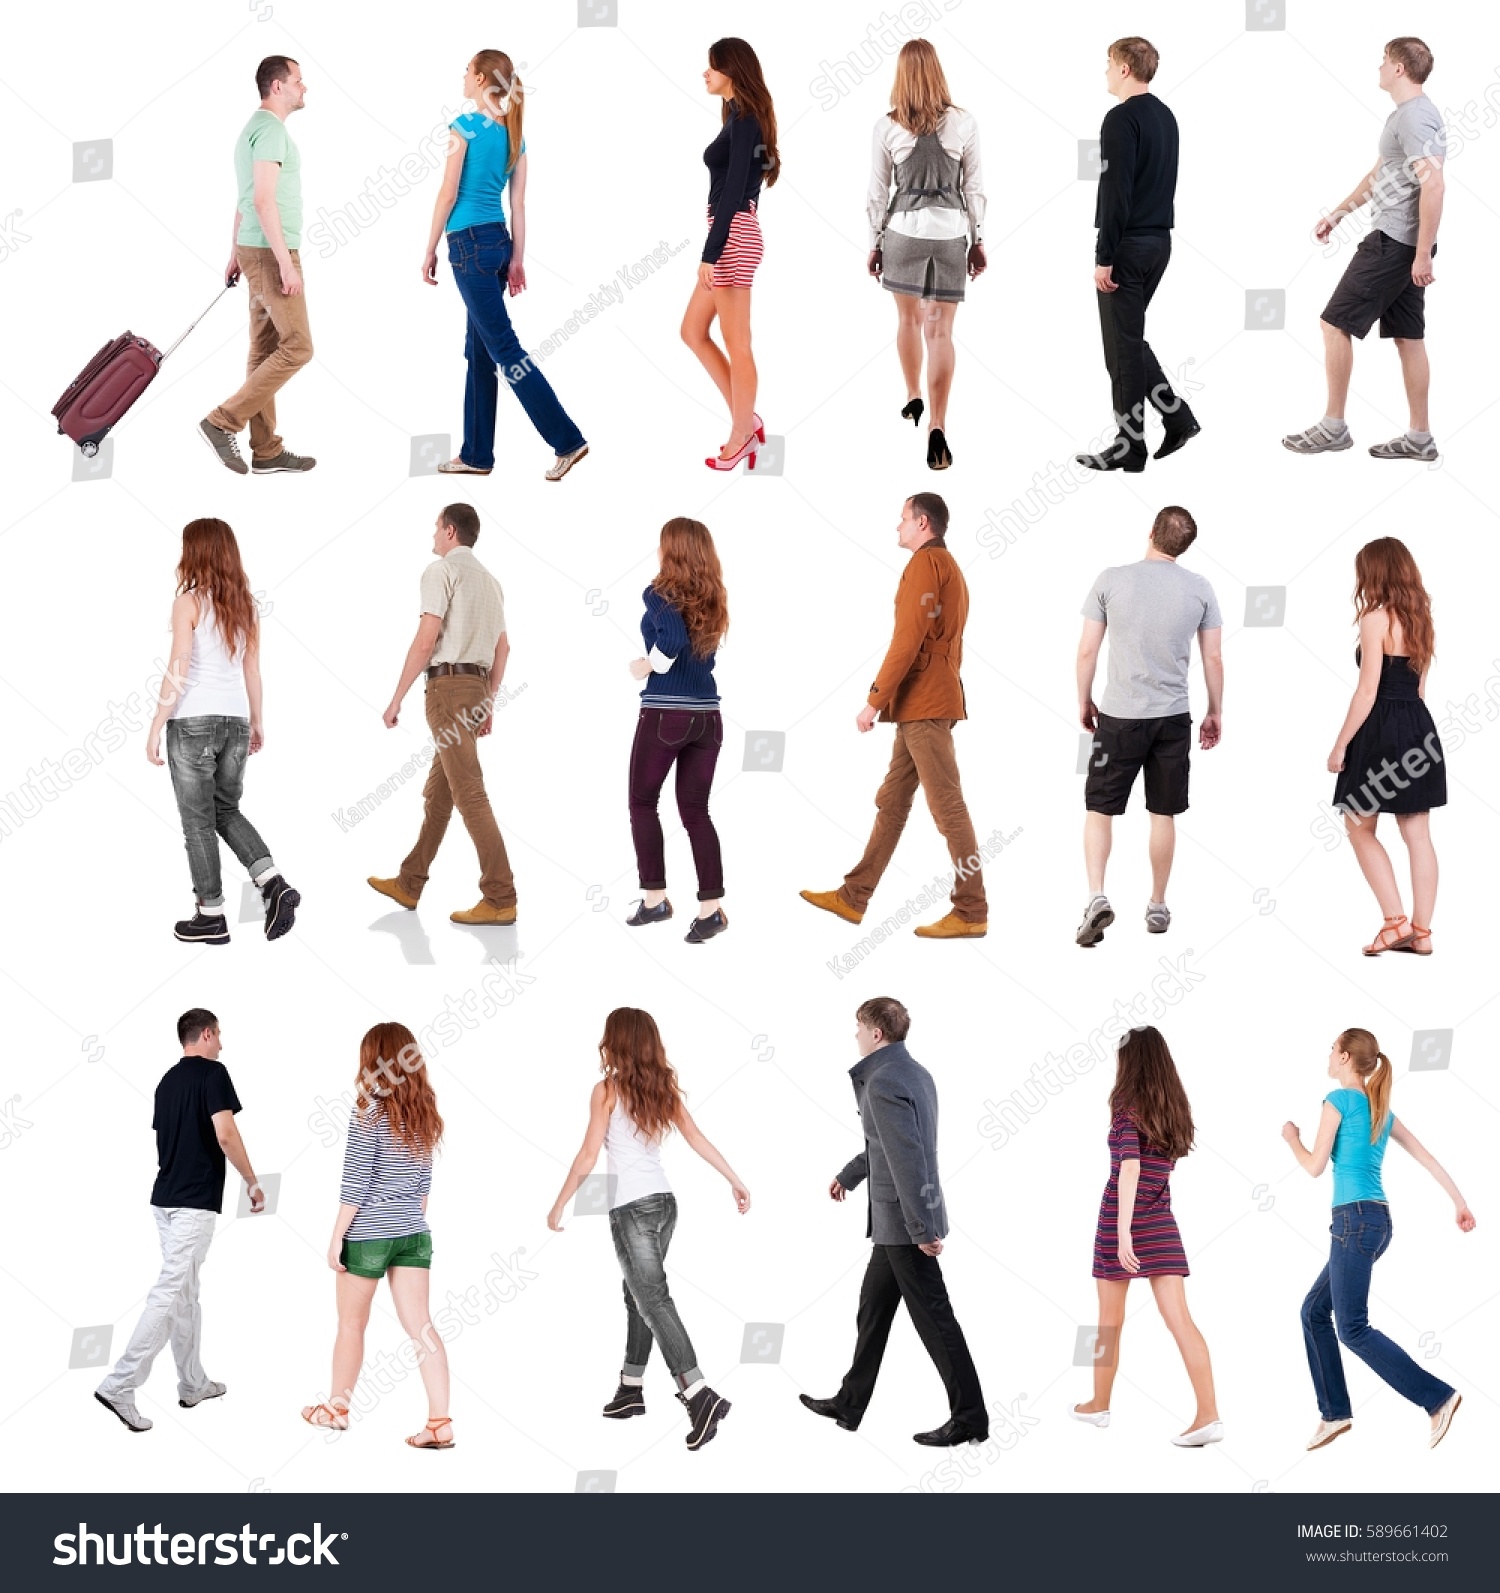 collection " back view of walking people ". going people in motion set.  backside view of person.  Rear view people collection. Isolated over white background. #589661402